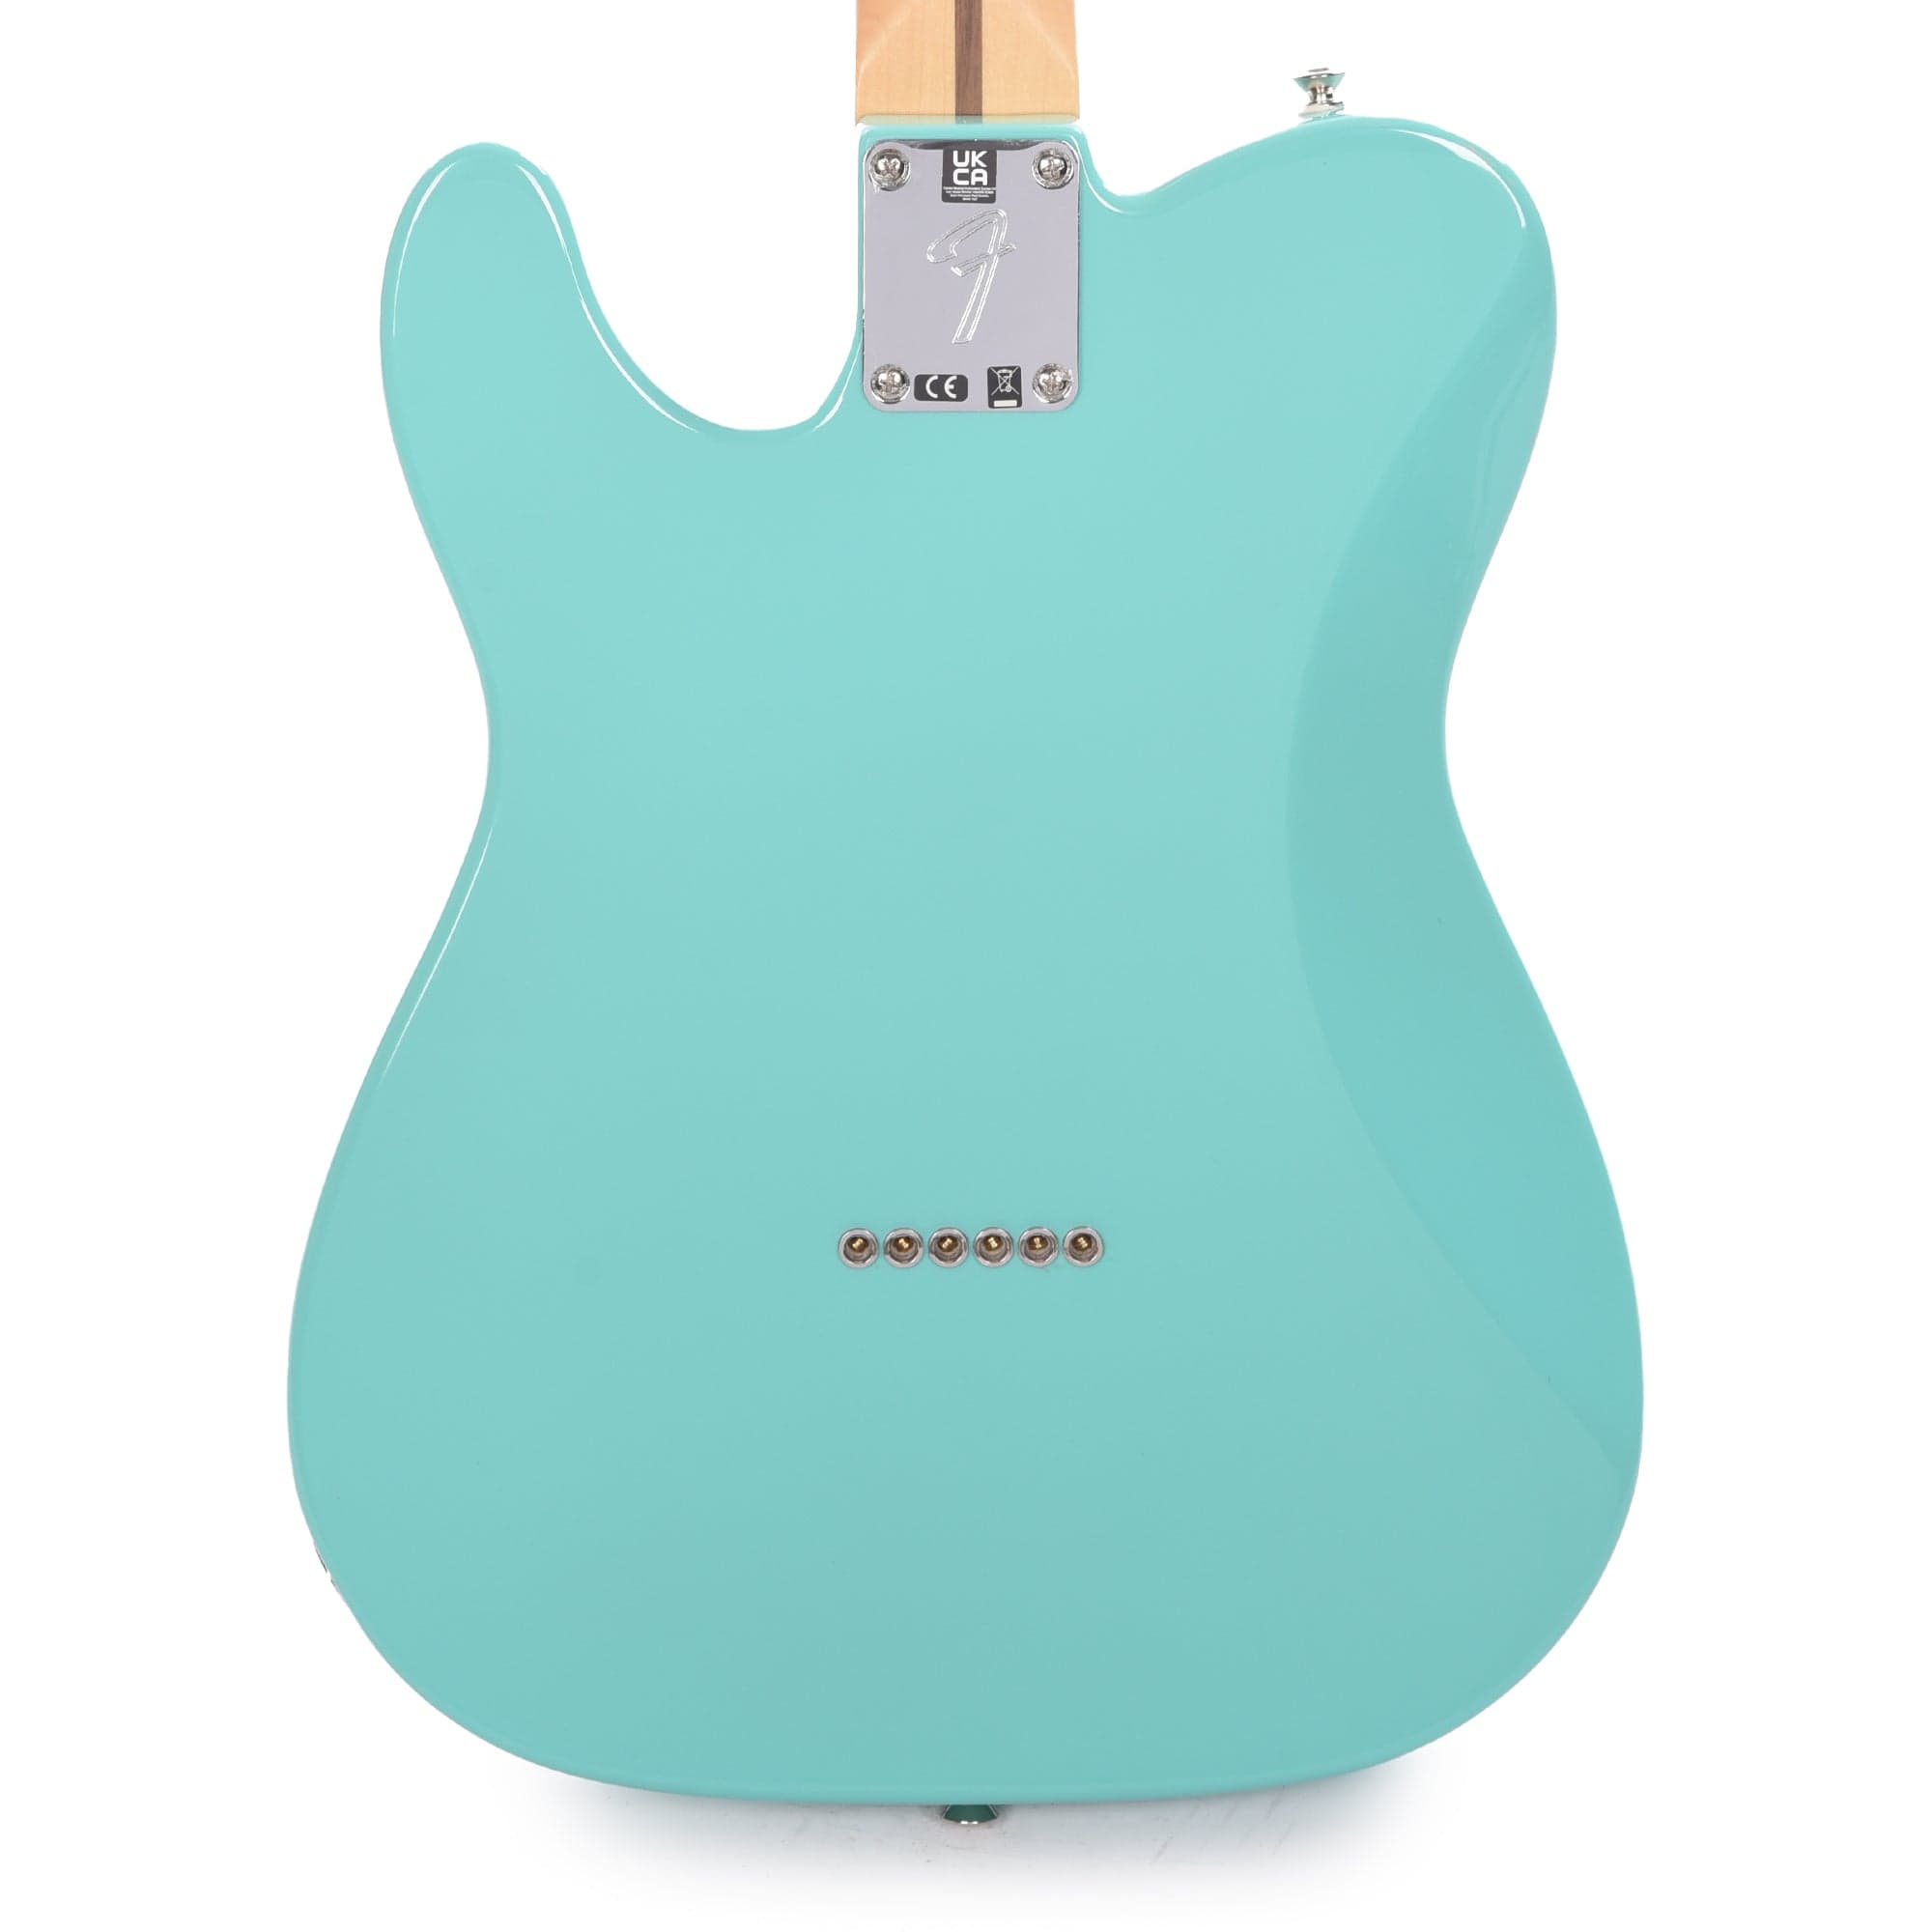 Fender Player Telecaster HH Sea Foam Green Electric Guitars / Solid Body